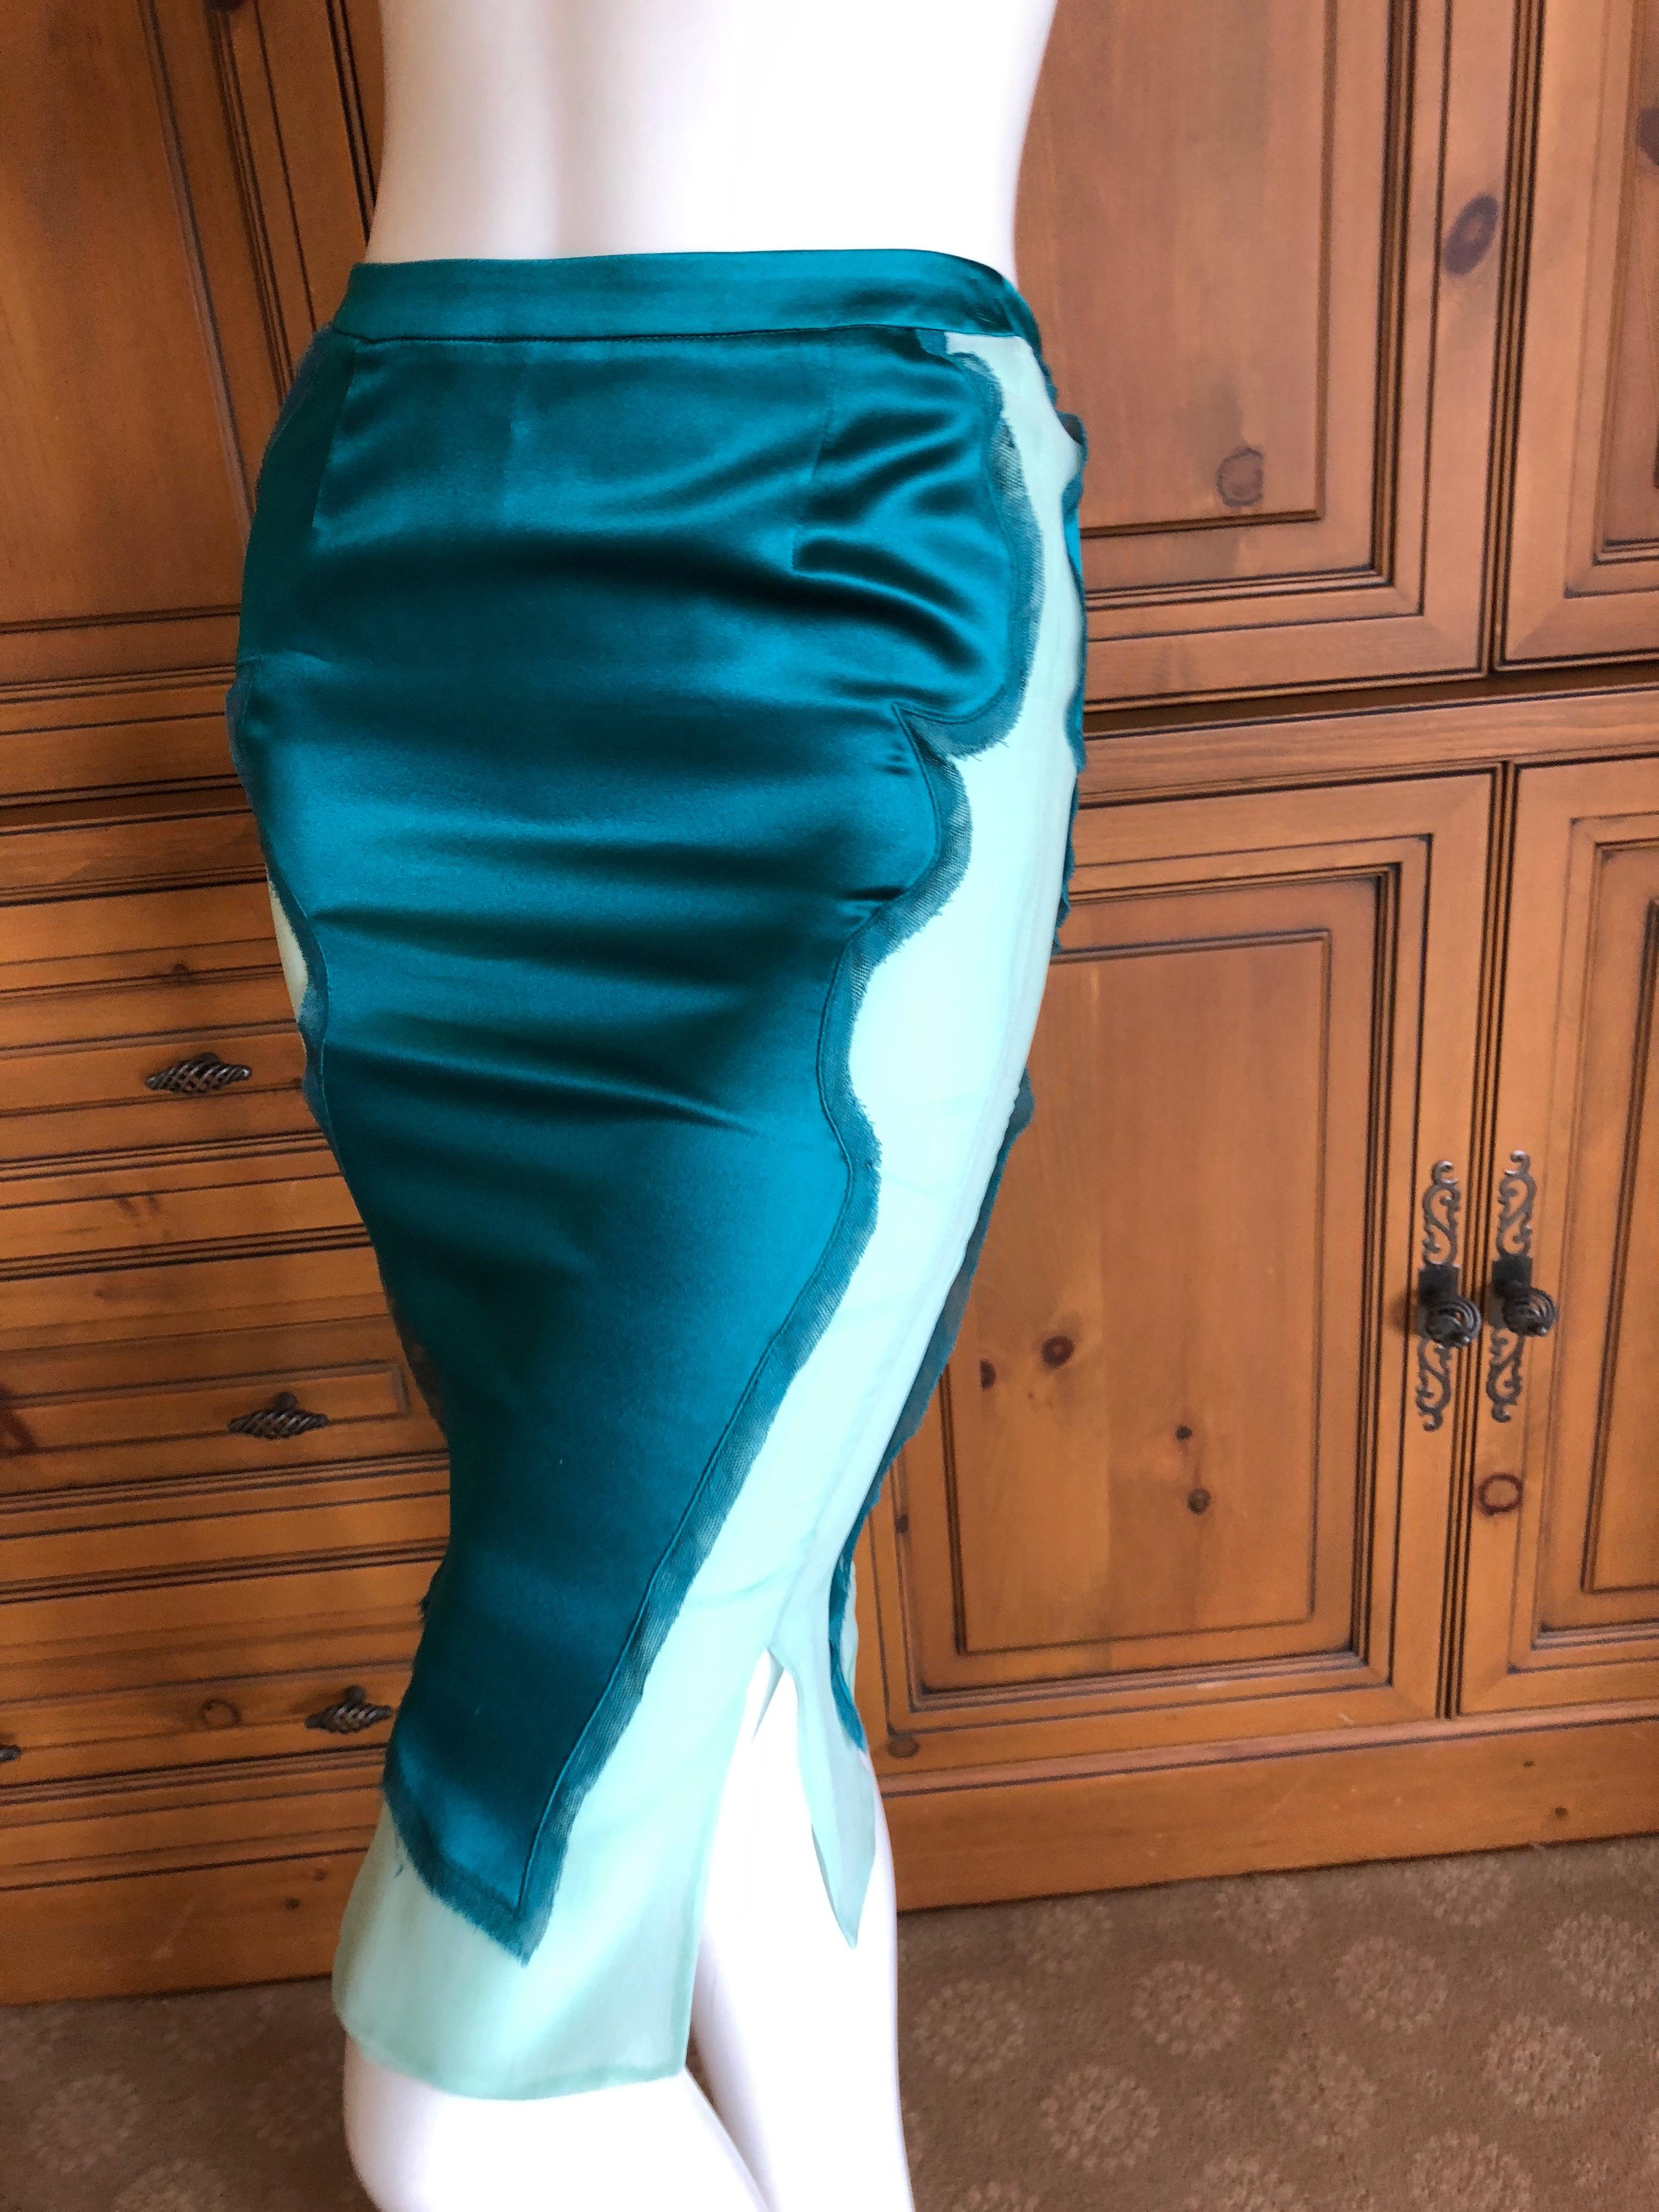 Yves Saint Laurent by Tom Ford 2004 Teal and Turquoise Silk Skirt In Excellent Condition For Sale In Cloverdale, CA